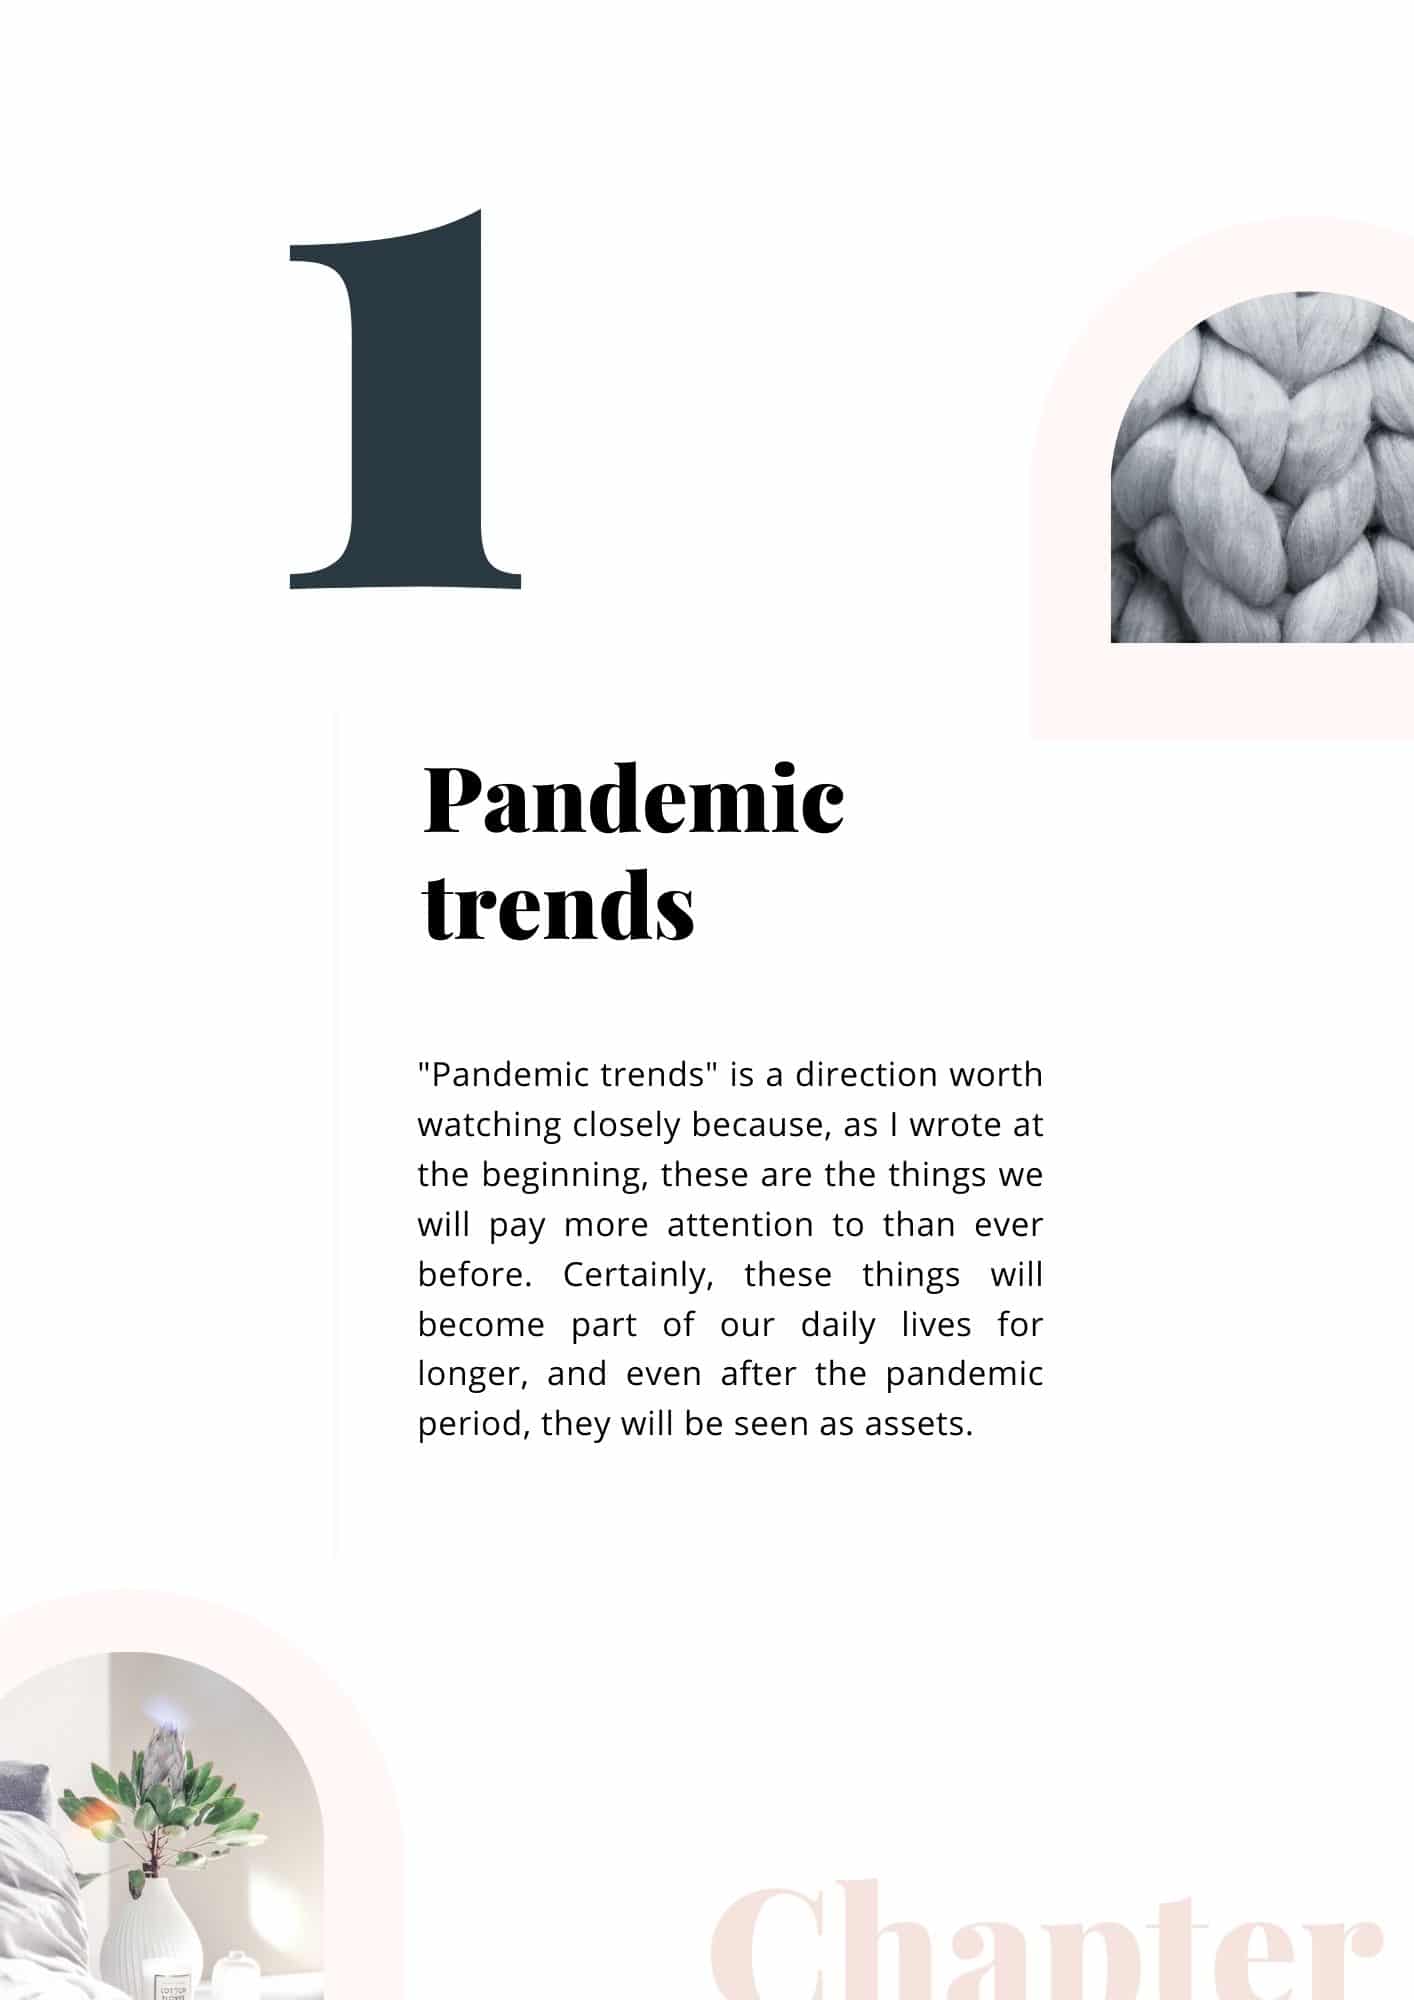 Pandemic trends